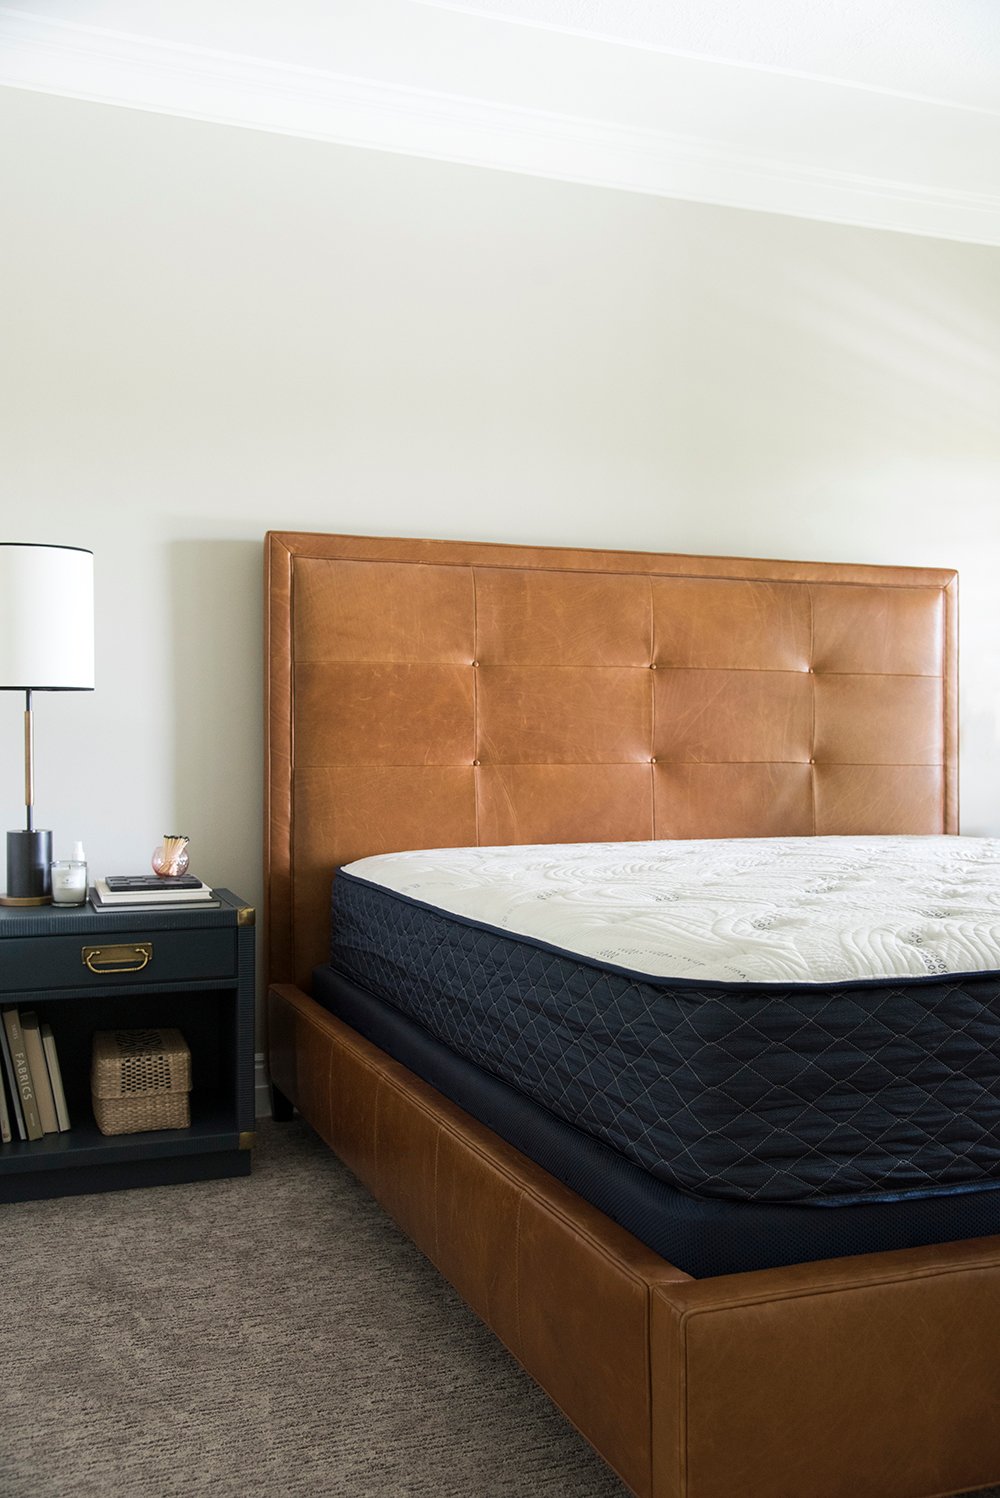 Upgrading Our Mattress - roomfortuesday.com